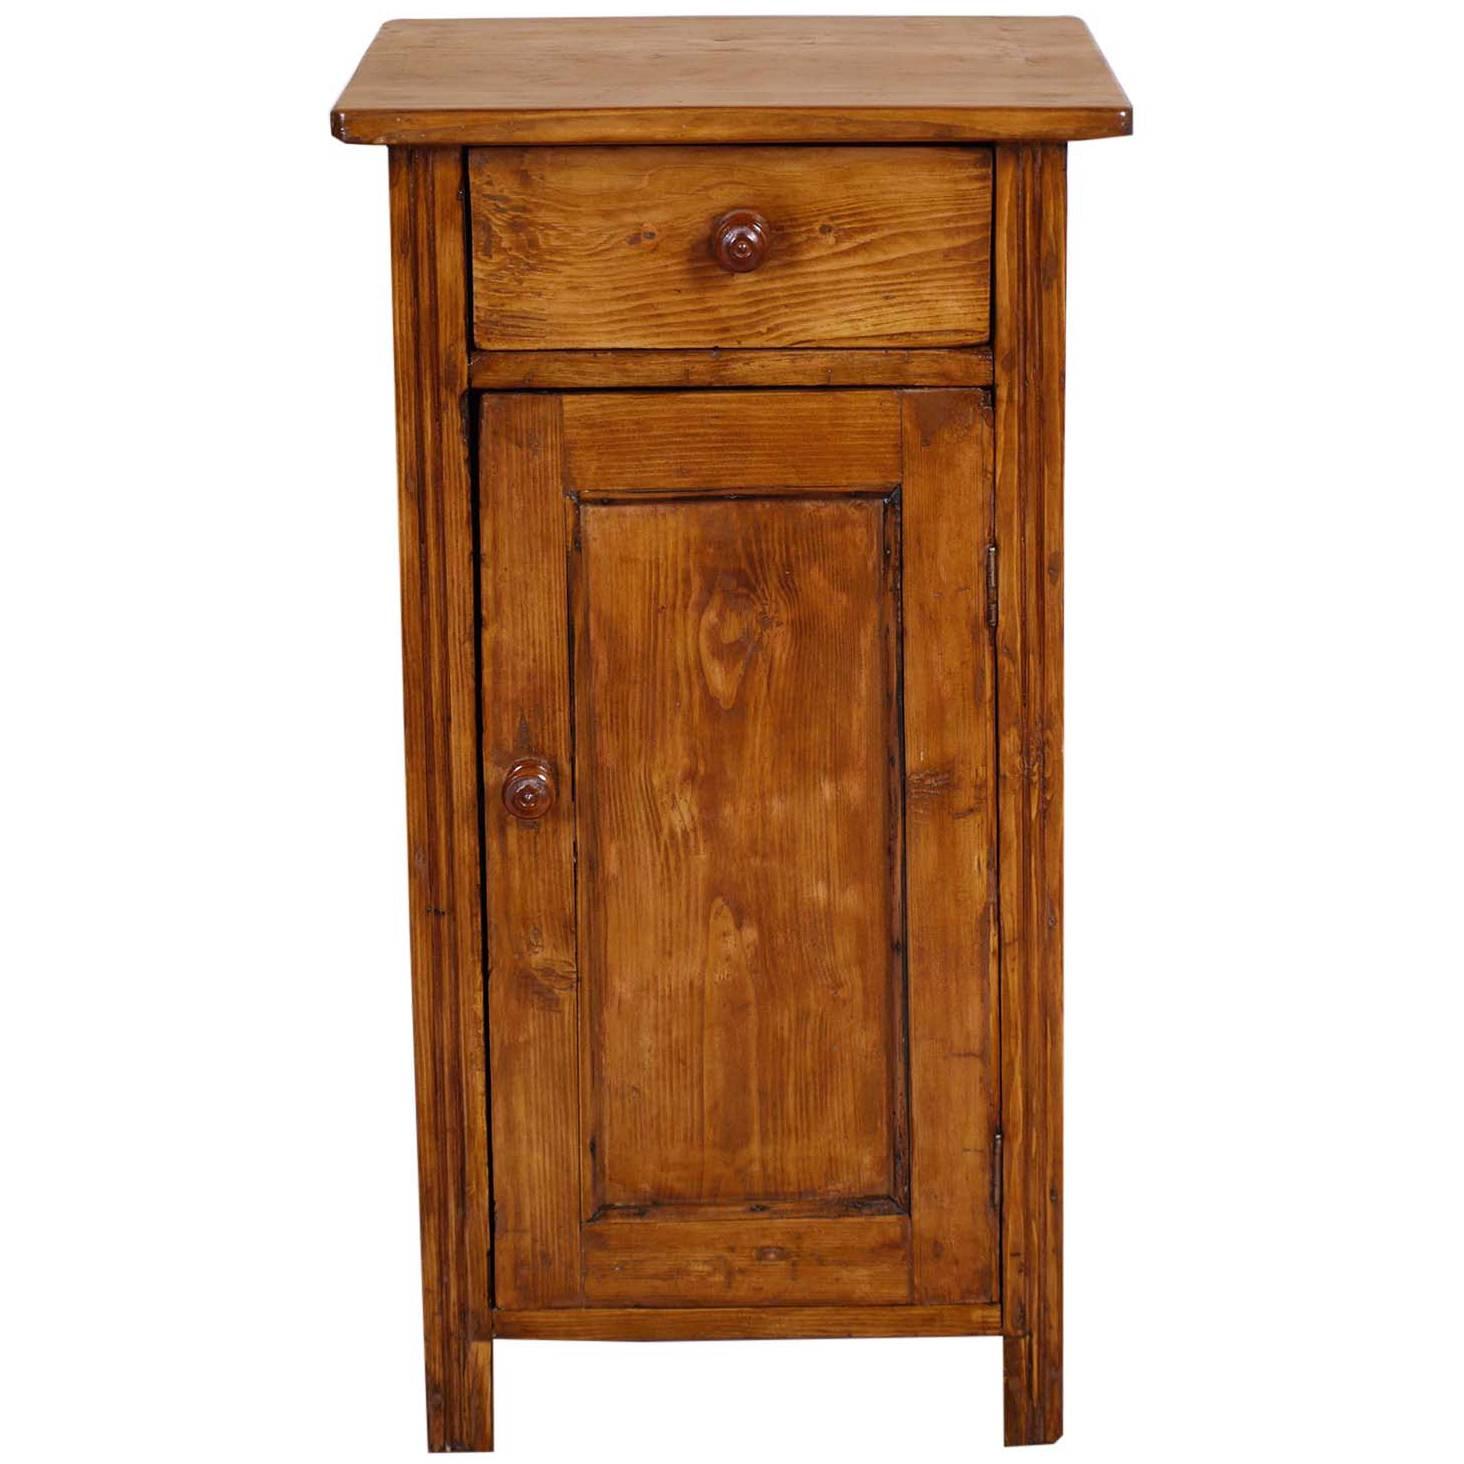 19th Century Country Rustic Tyrolean Nightstand Larch Restored Polished Wax